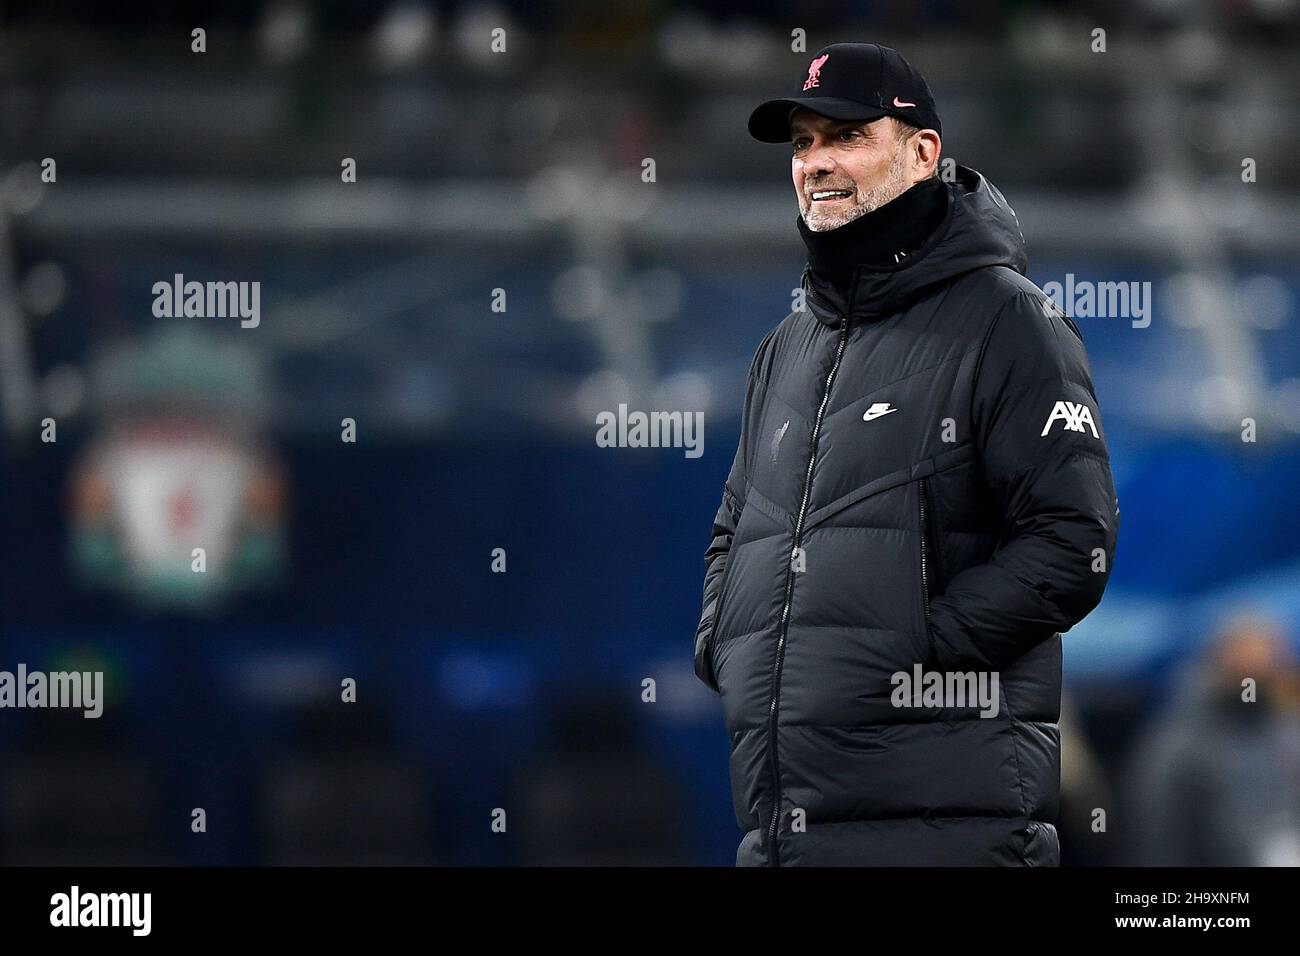 Jurgen Klopp Liverpool 2021 High Resolution Stock Photography and Images -  Alamy